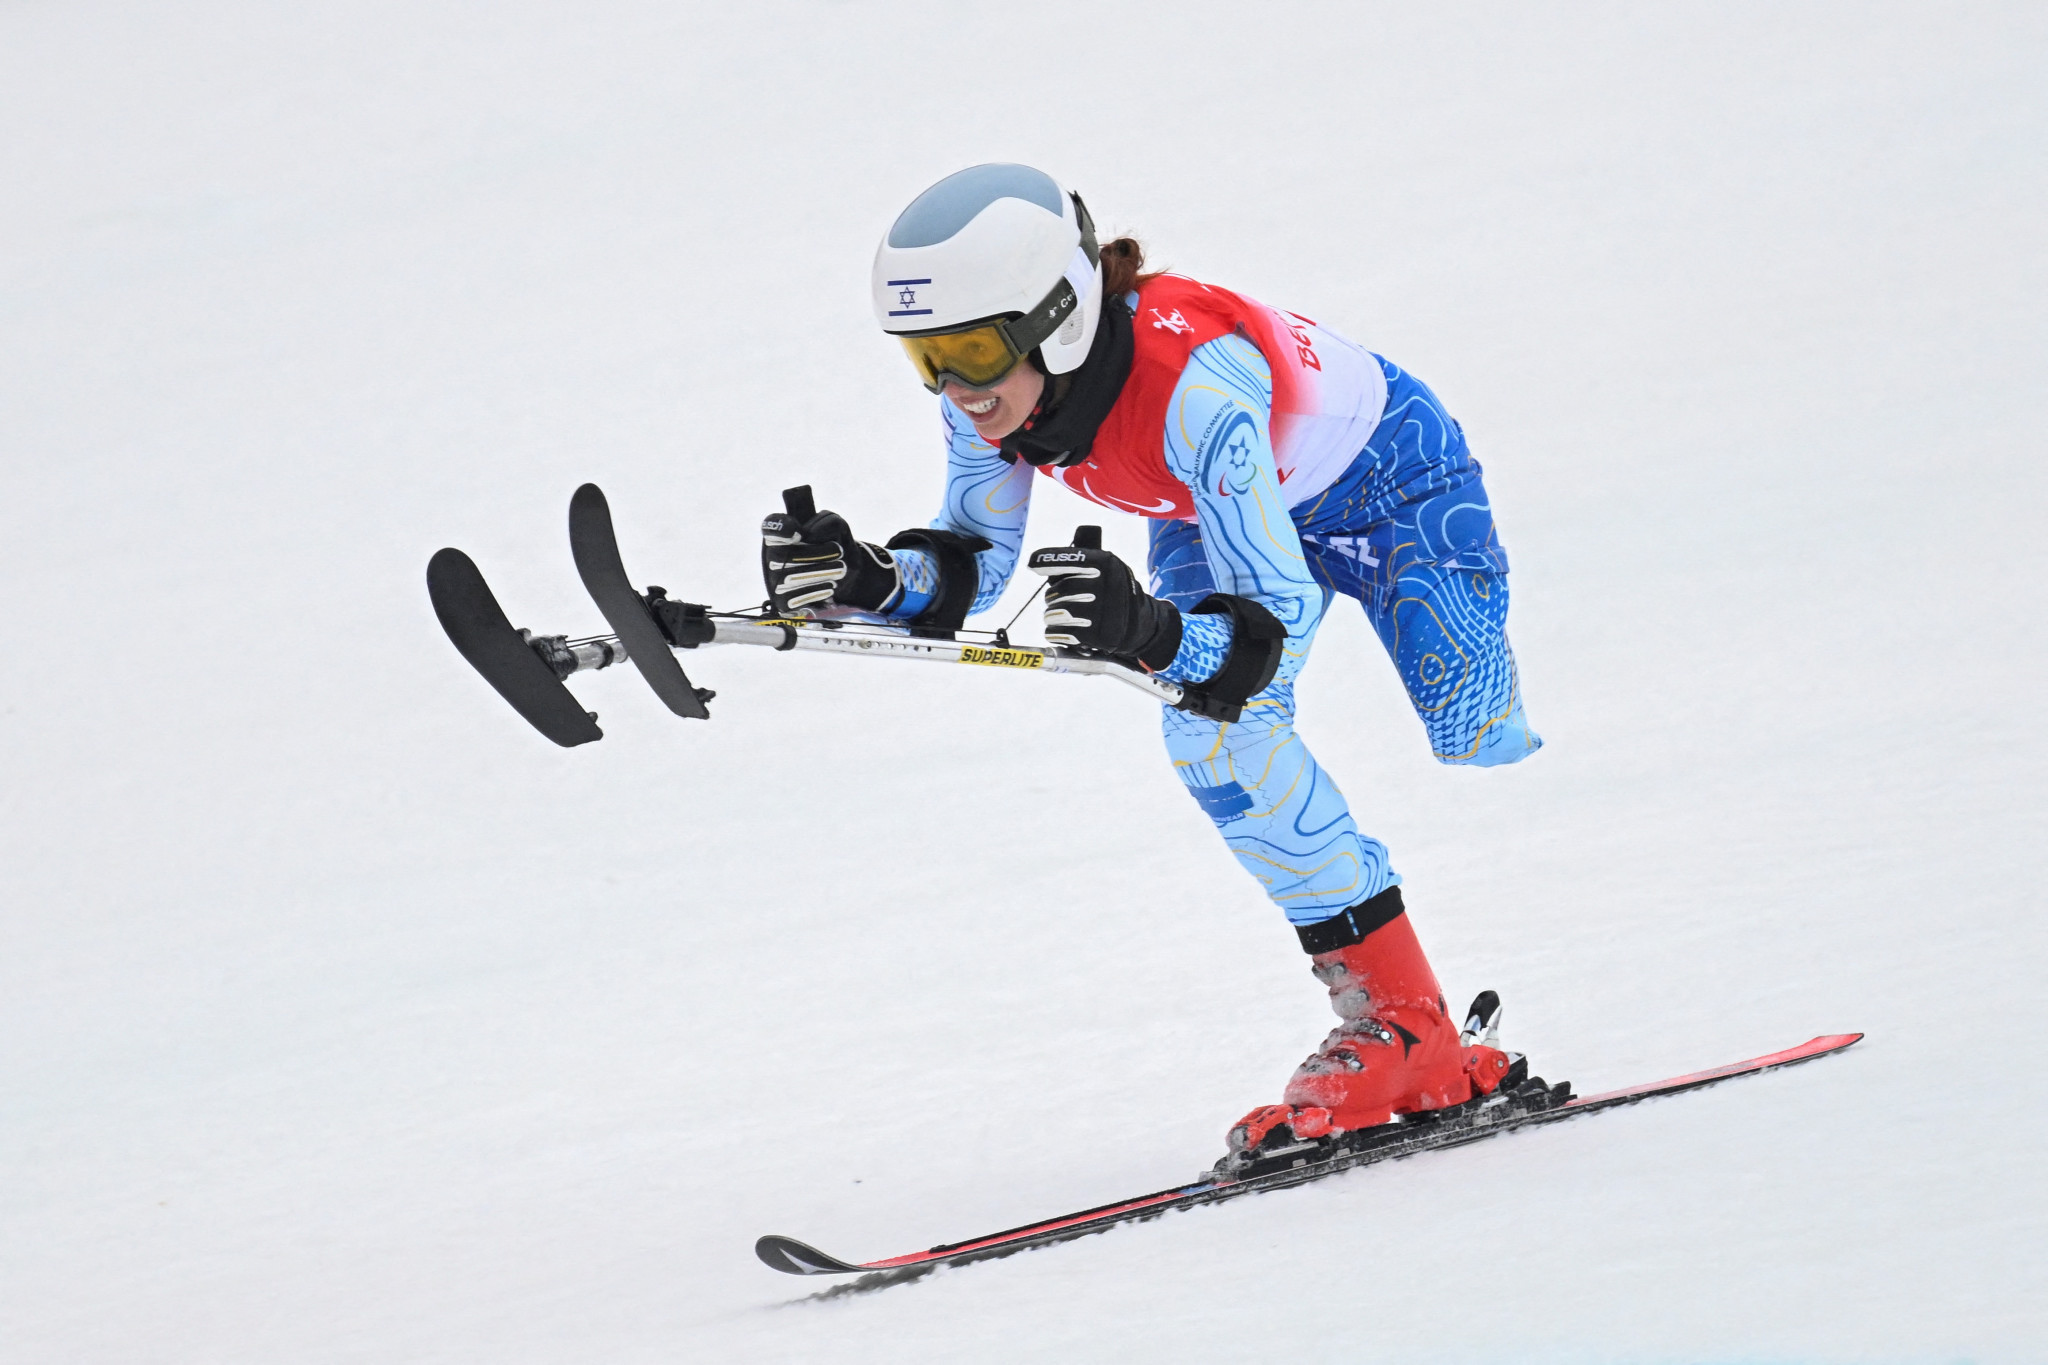 Israel's Sheina Vaspi pulled out of the women's slalom after a change in schedule caused a clash with Shabbat ©Getty Images